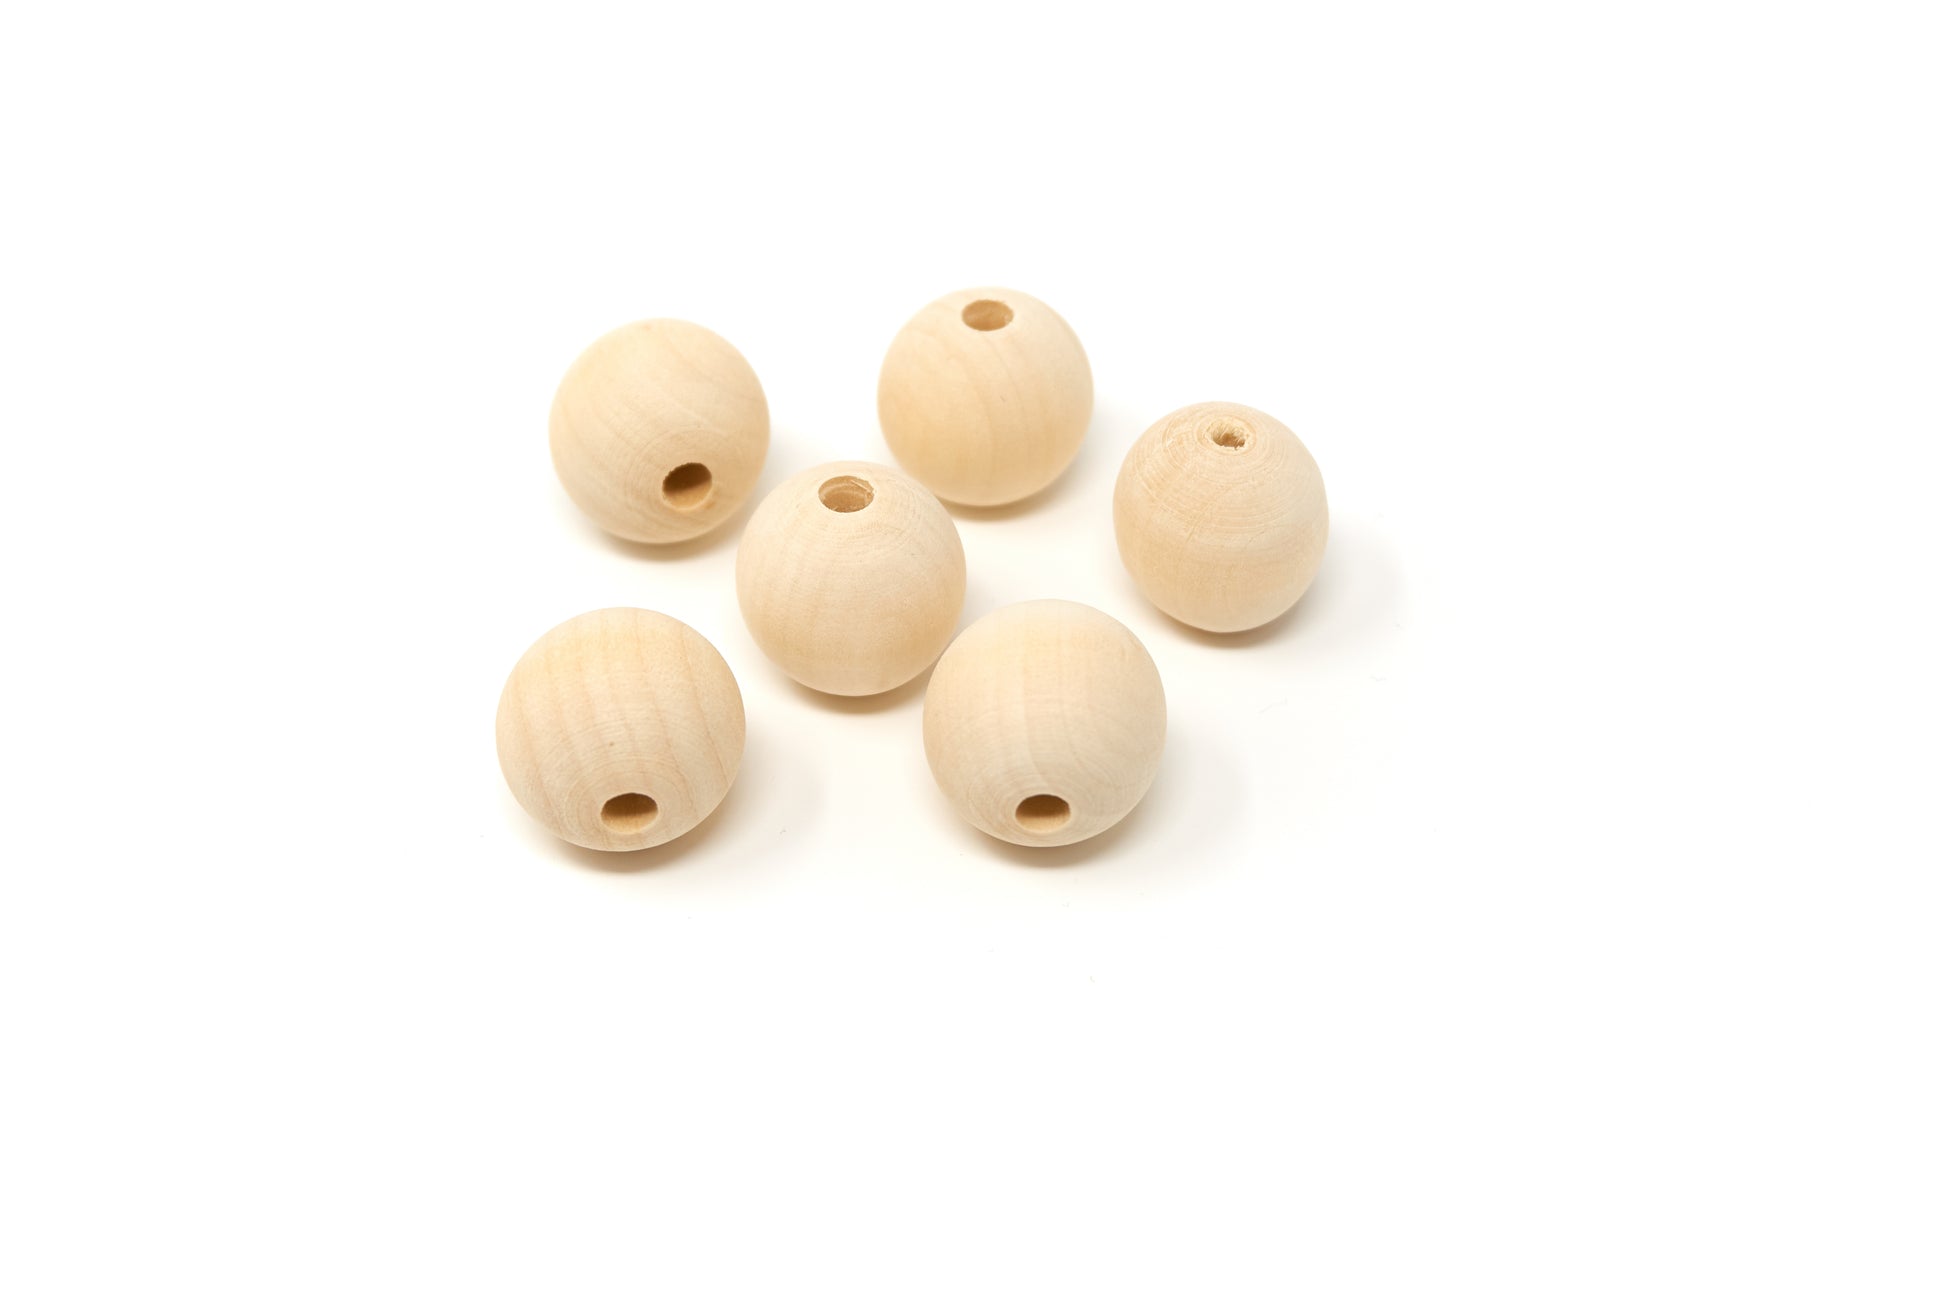 Natural Round Wood Beads 25mm 50 pieces - Cameos Art Shop